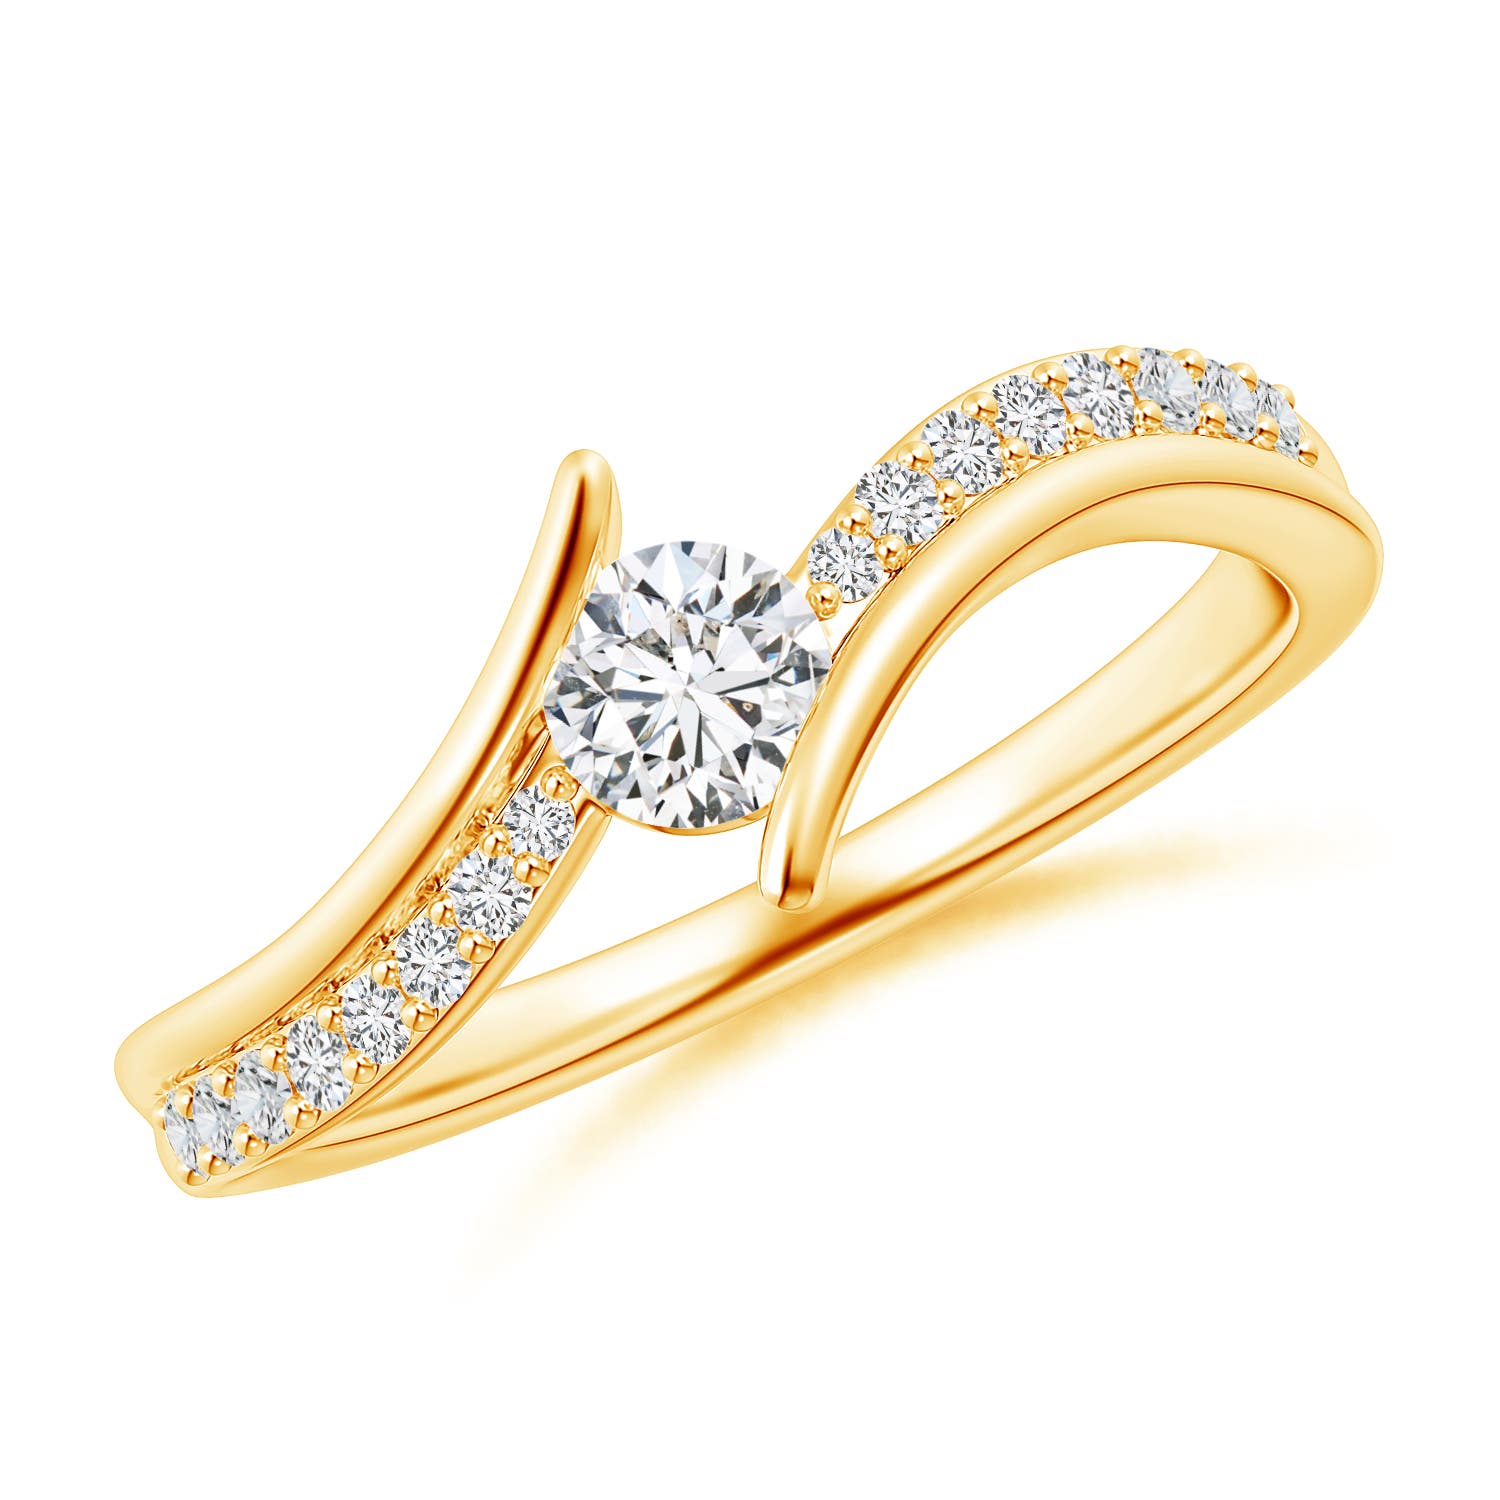 H, SI2 / 0.49 CT / 14 KT Yellow Gold